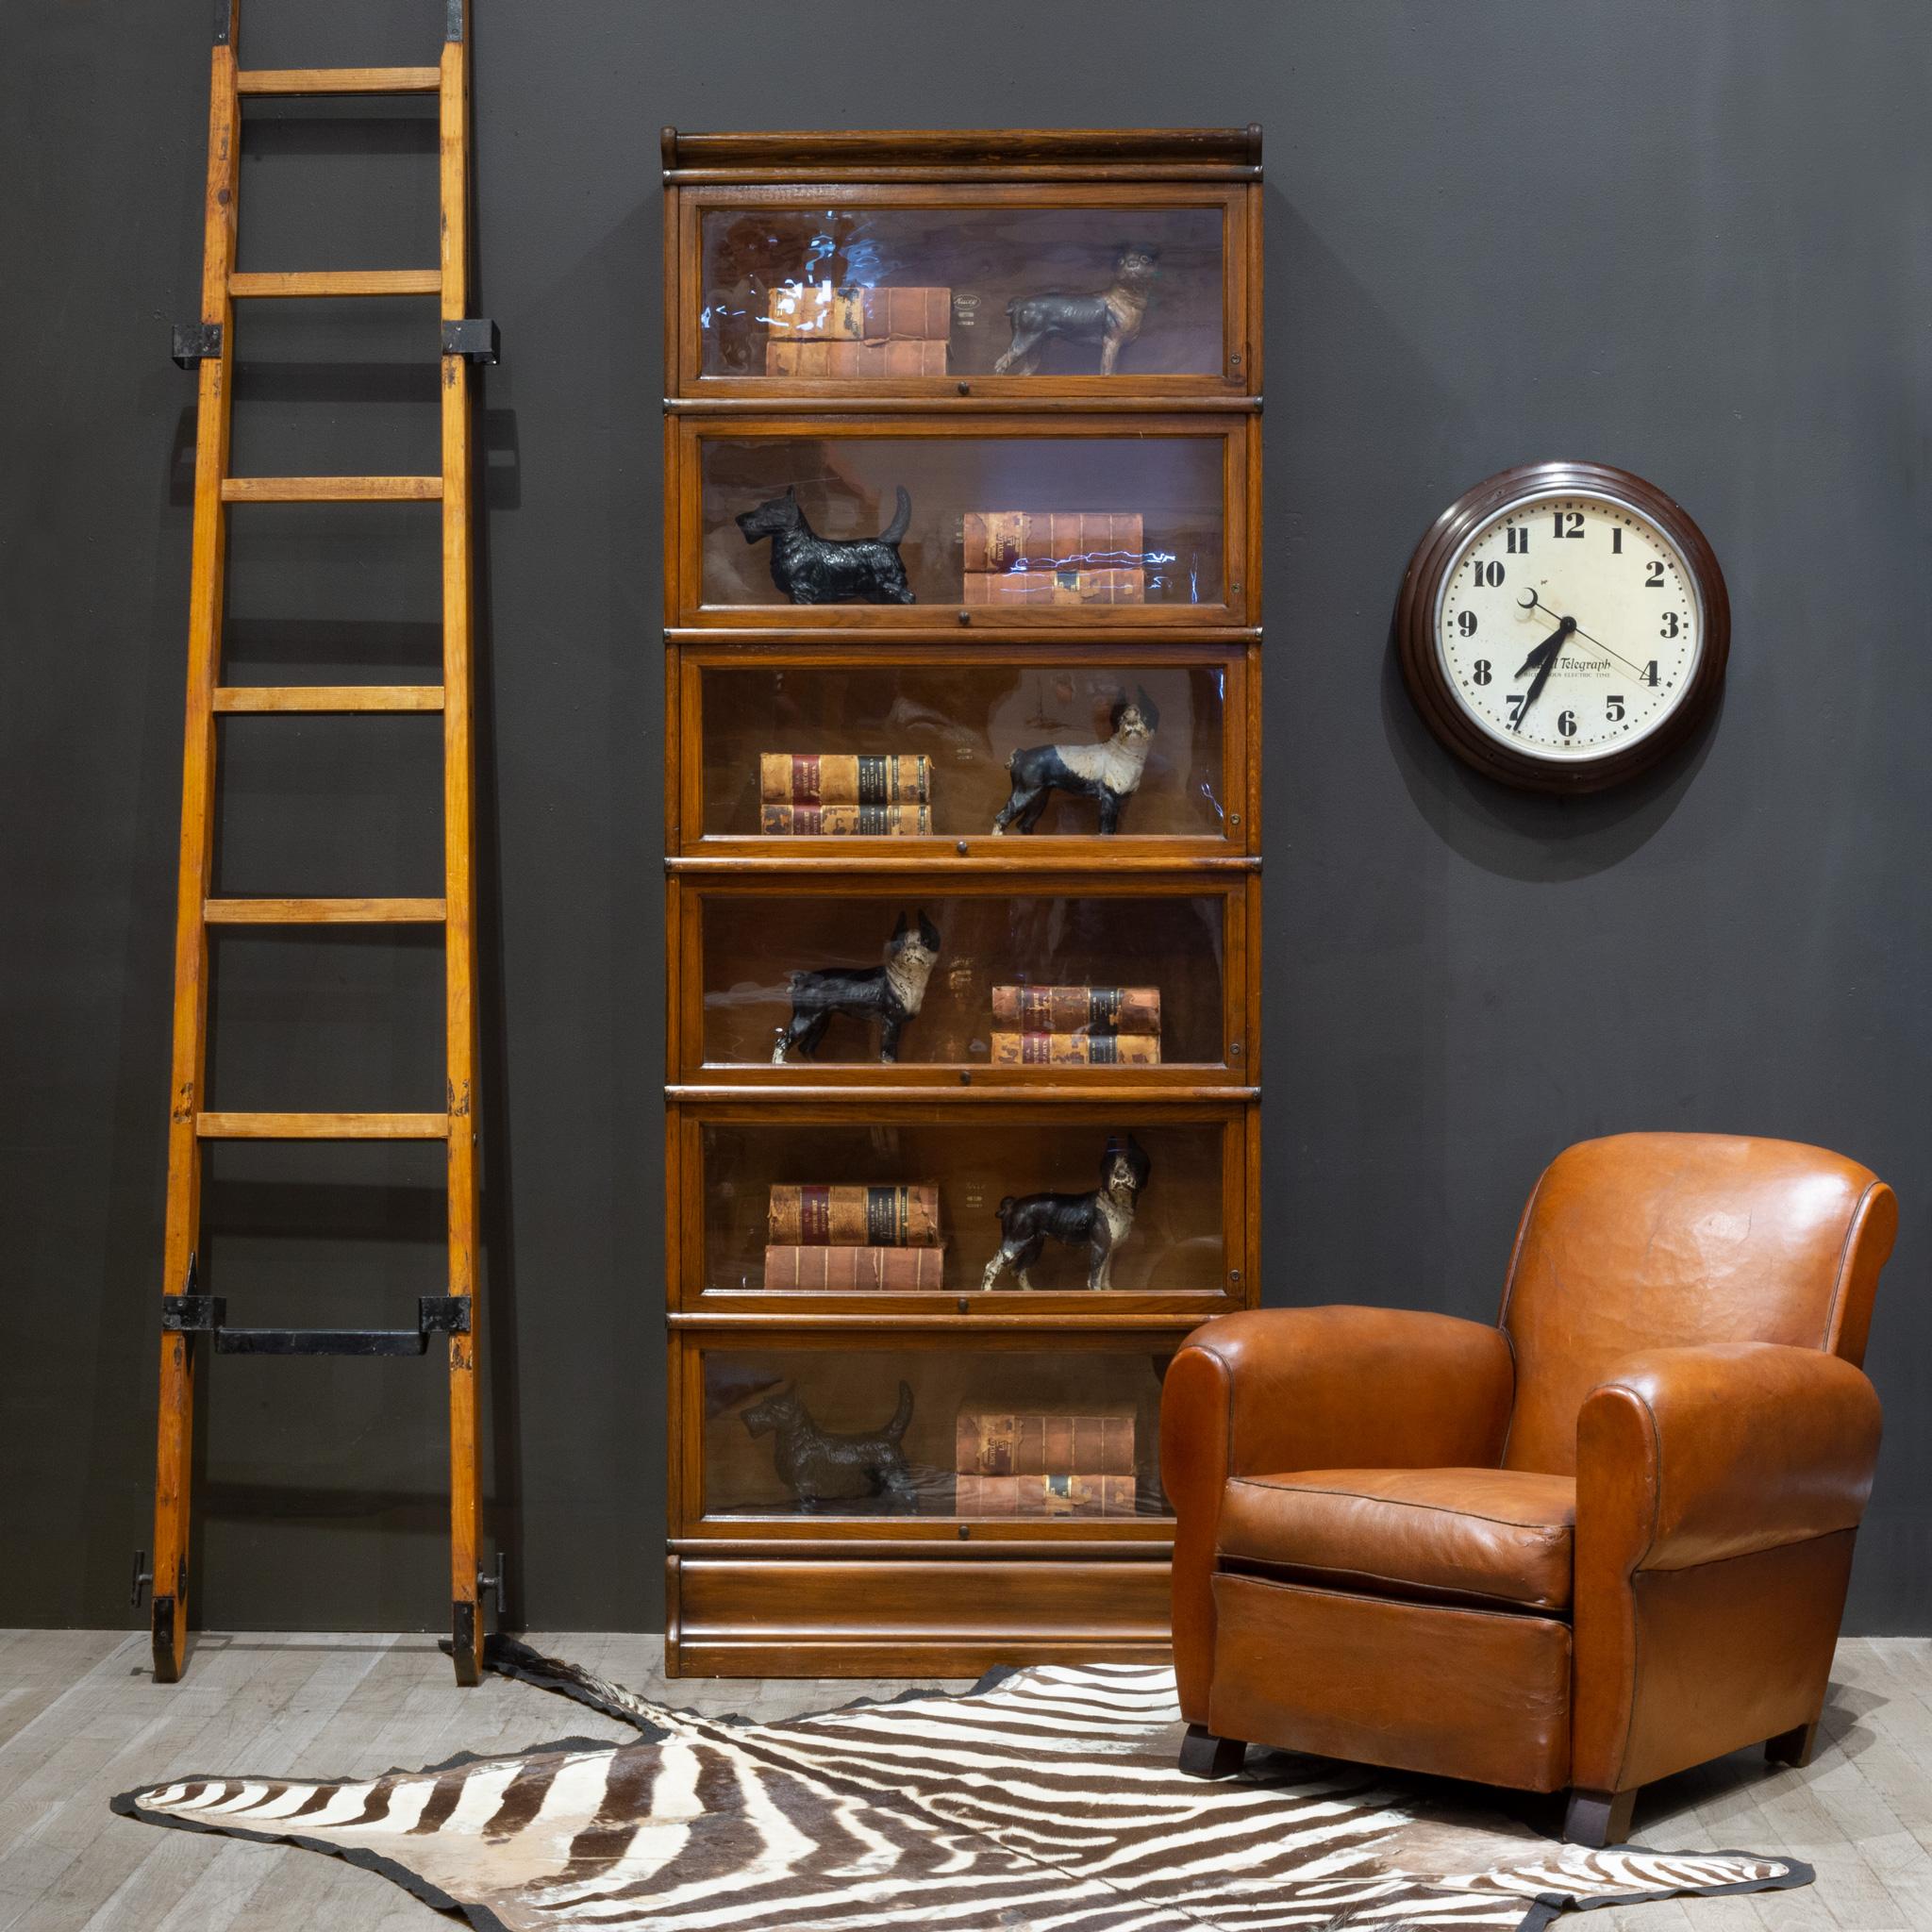 ABOUT

An antique Macey lawyer's or barrister's bookcase with patinated brass knobs, copper flashed bands on the sides and glass doors that open and slide in from the top. Quarter sawn dark Walnut finish with a Maple finish in the interior. Original